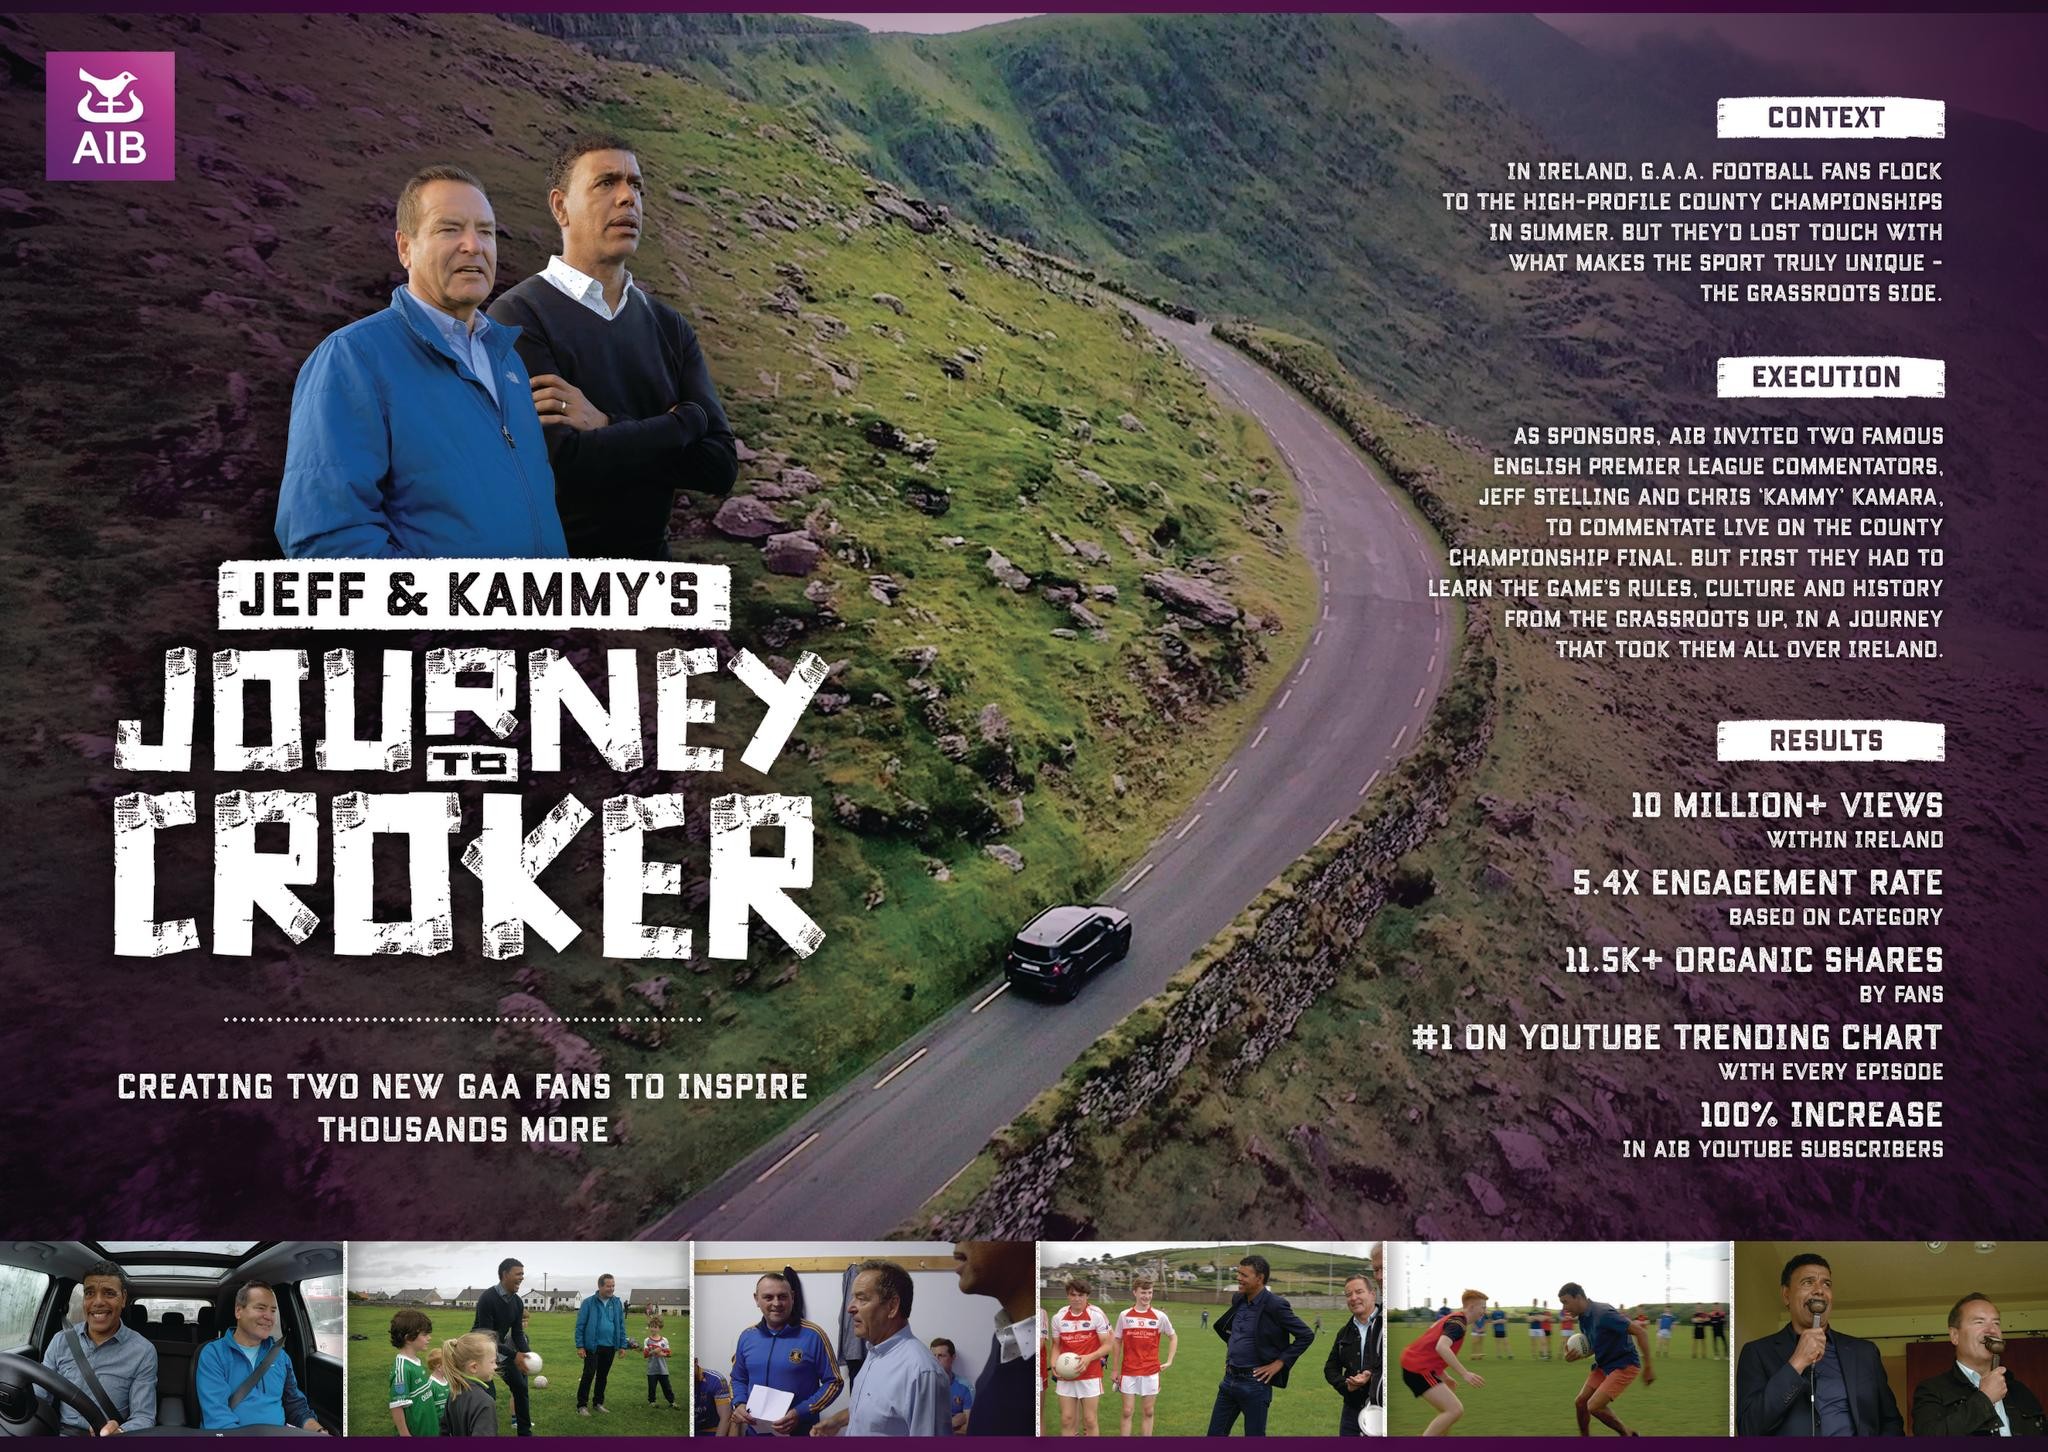 Jeff and Kammy’s Journey to Croker